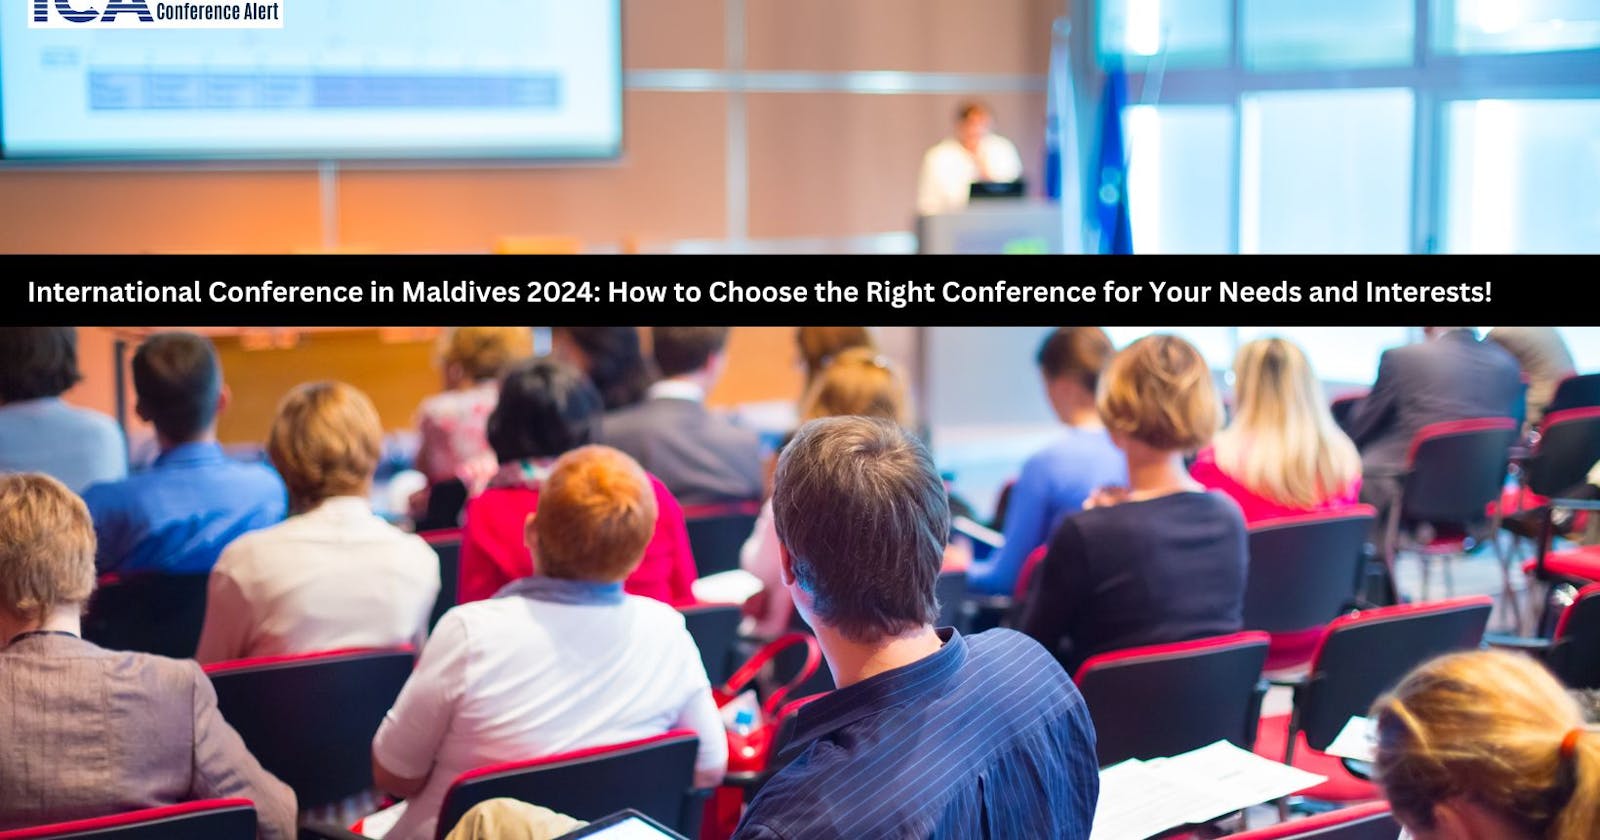 International Conference in Maldives 2024: How to Choose the Right Conference for Your Needs and Interests!